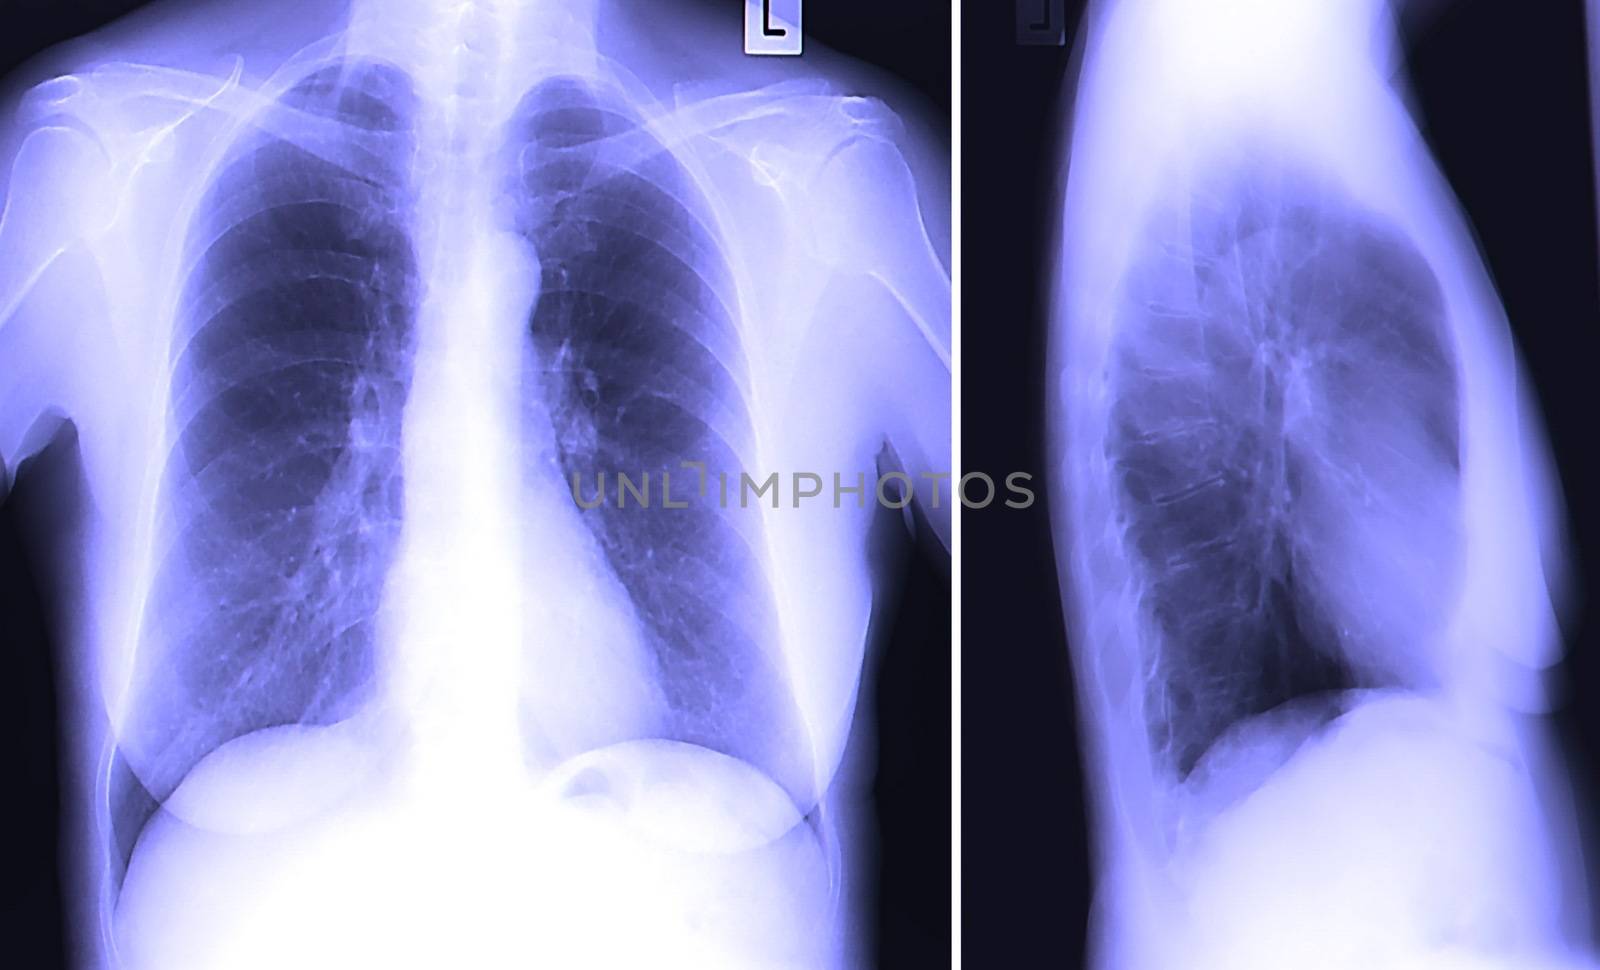 A chest x-ray image for a medical diagnosis